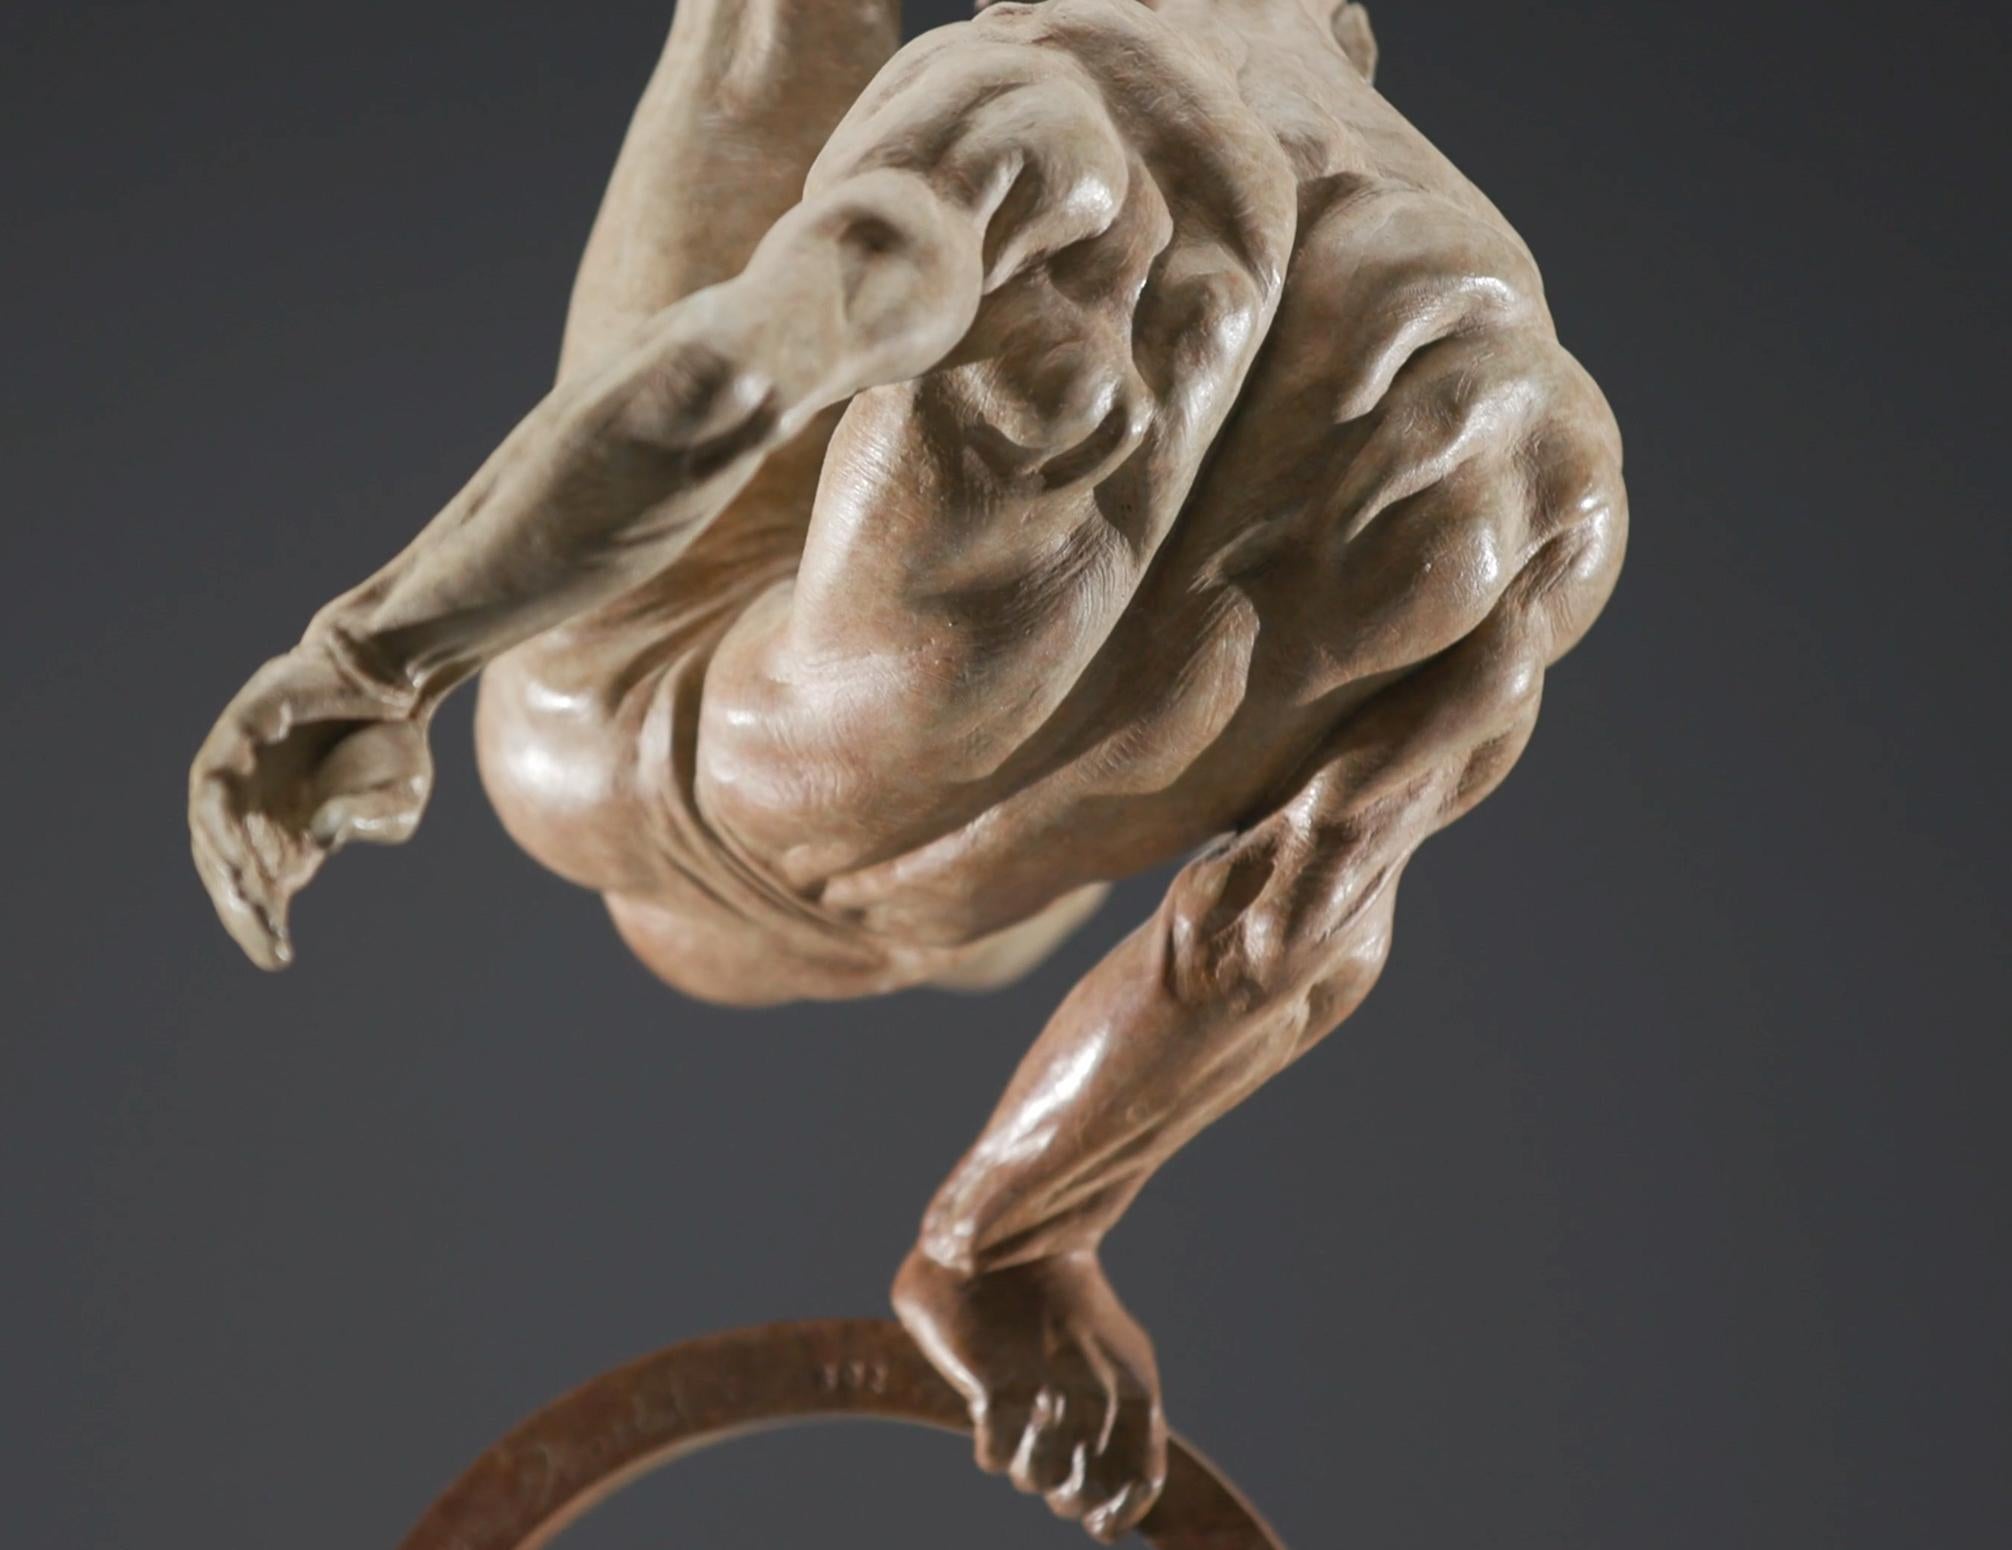 	
Created by artist Richard MacDonald for the 1996 Atlanta Summer Olympics, Flair Across America celebrates the triumph of the human spirit and the idealization of the human form. While its message is universal, Flair Across America also embodies